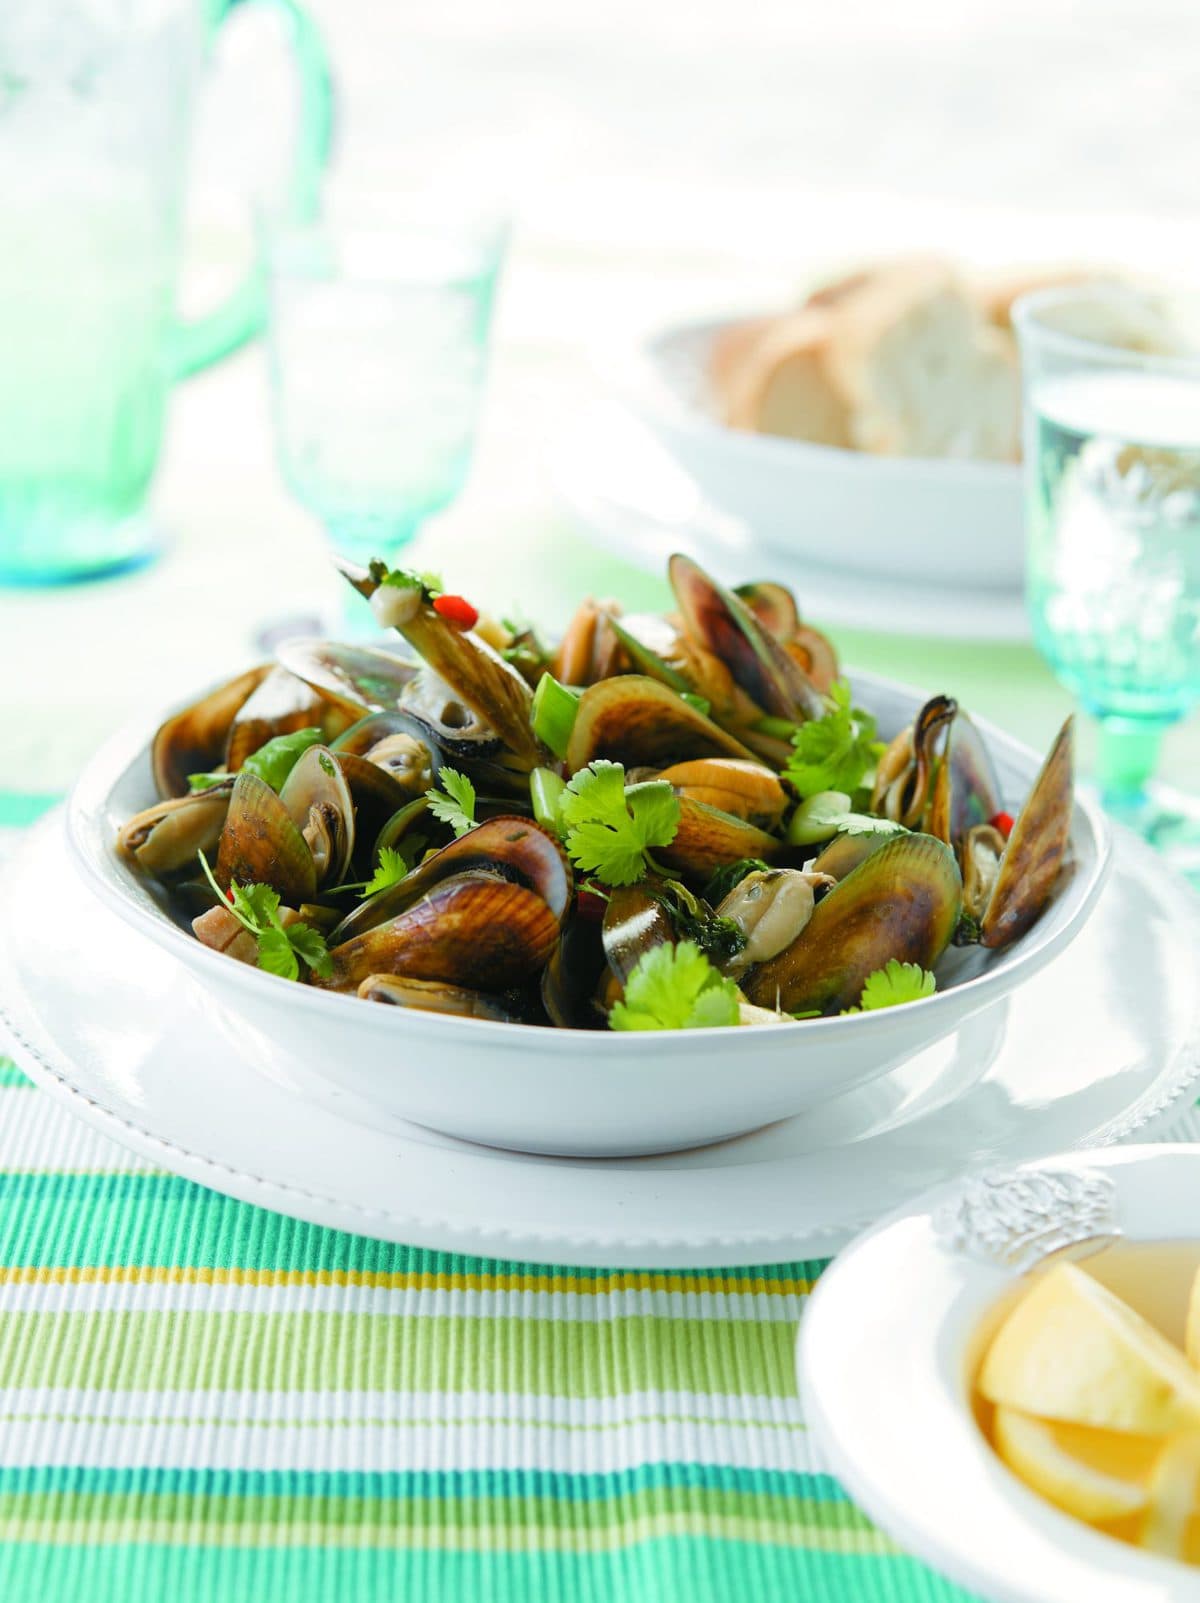 Mussels in ginger, coriander and garlic - Healthy Food Guide